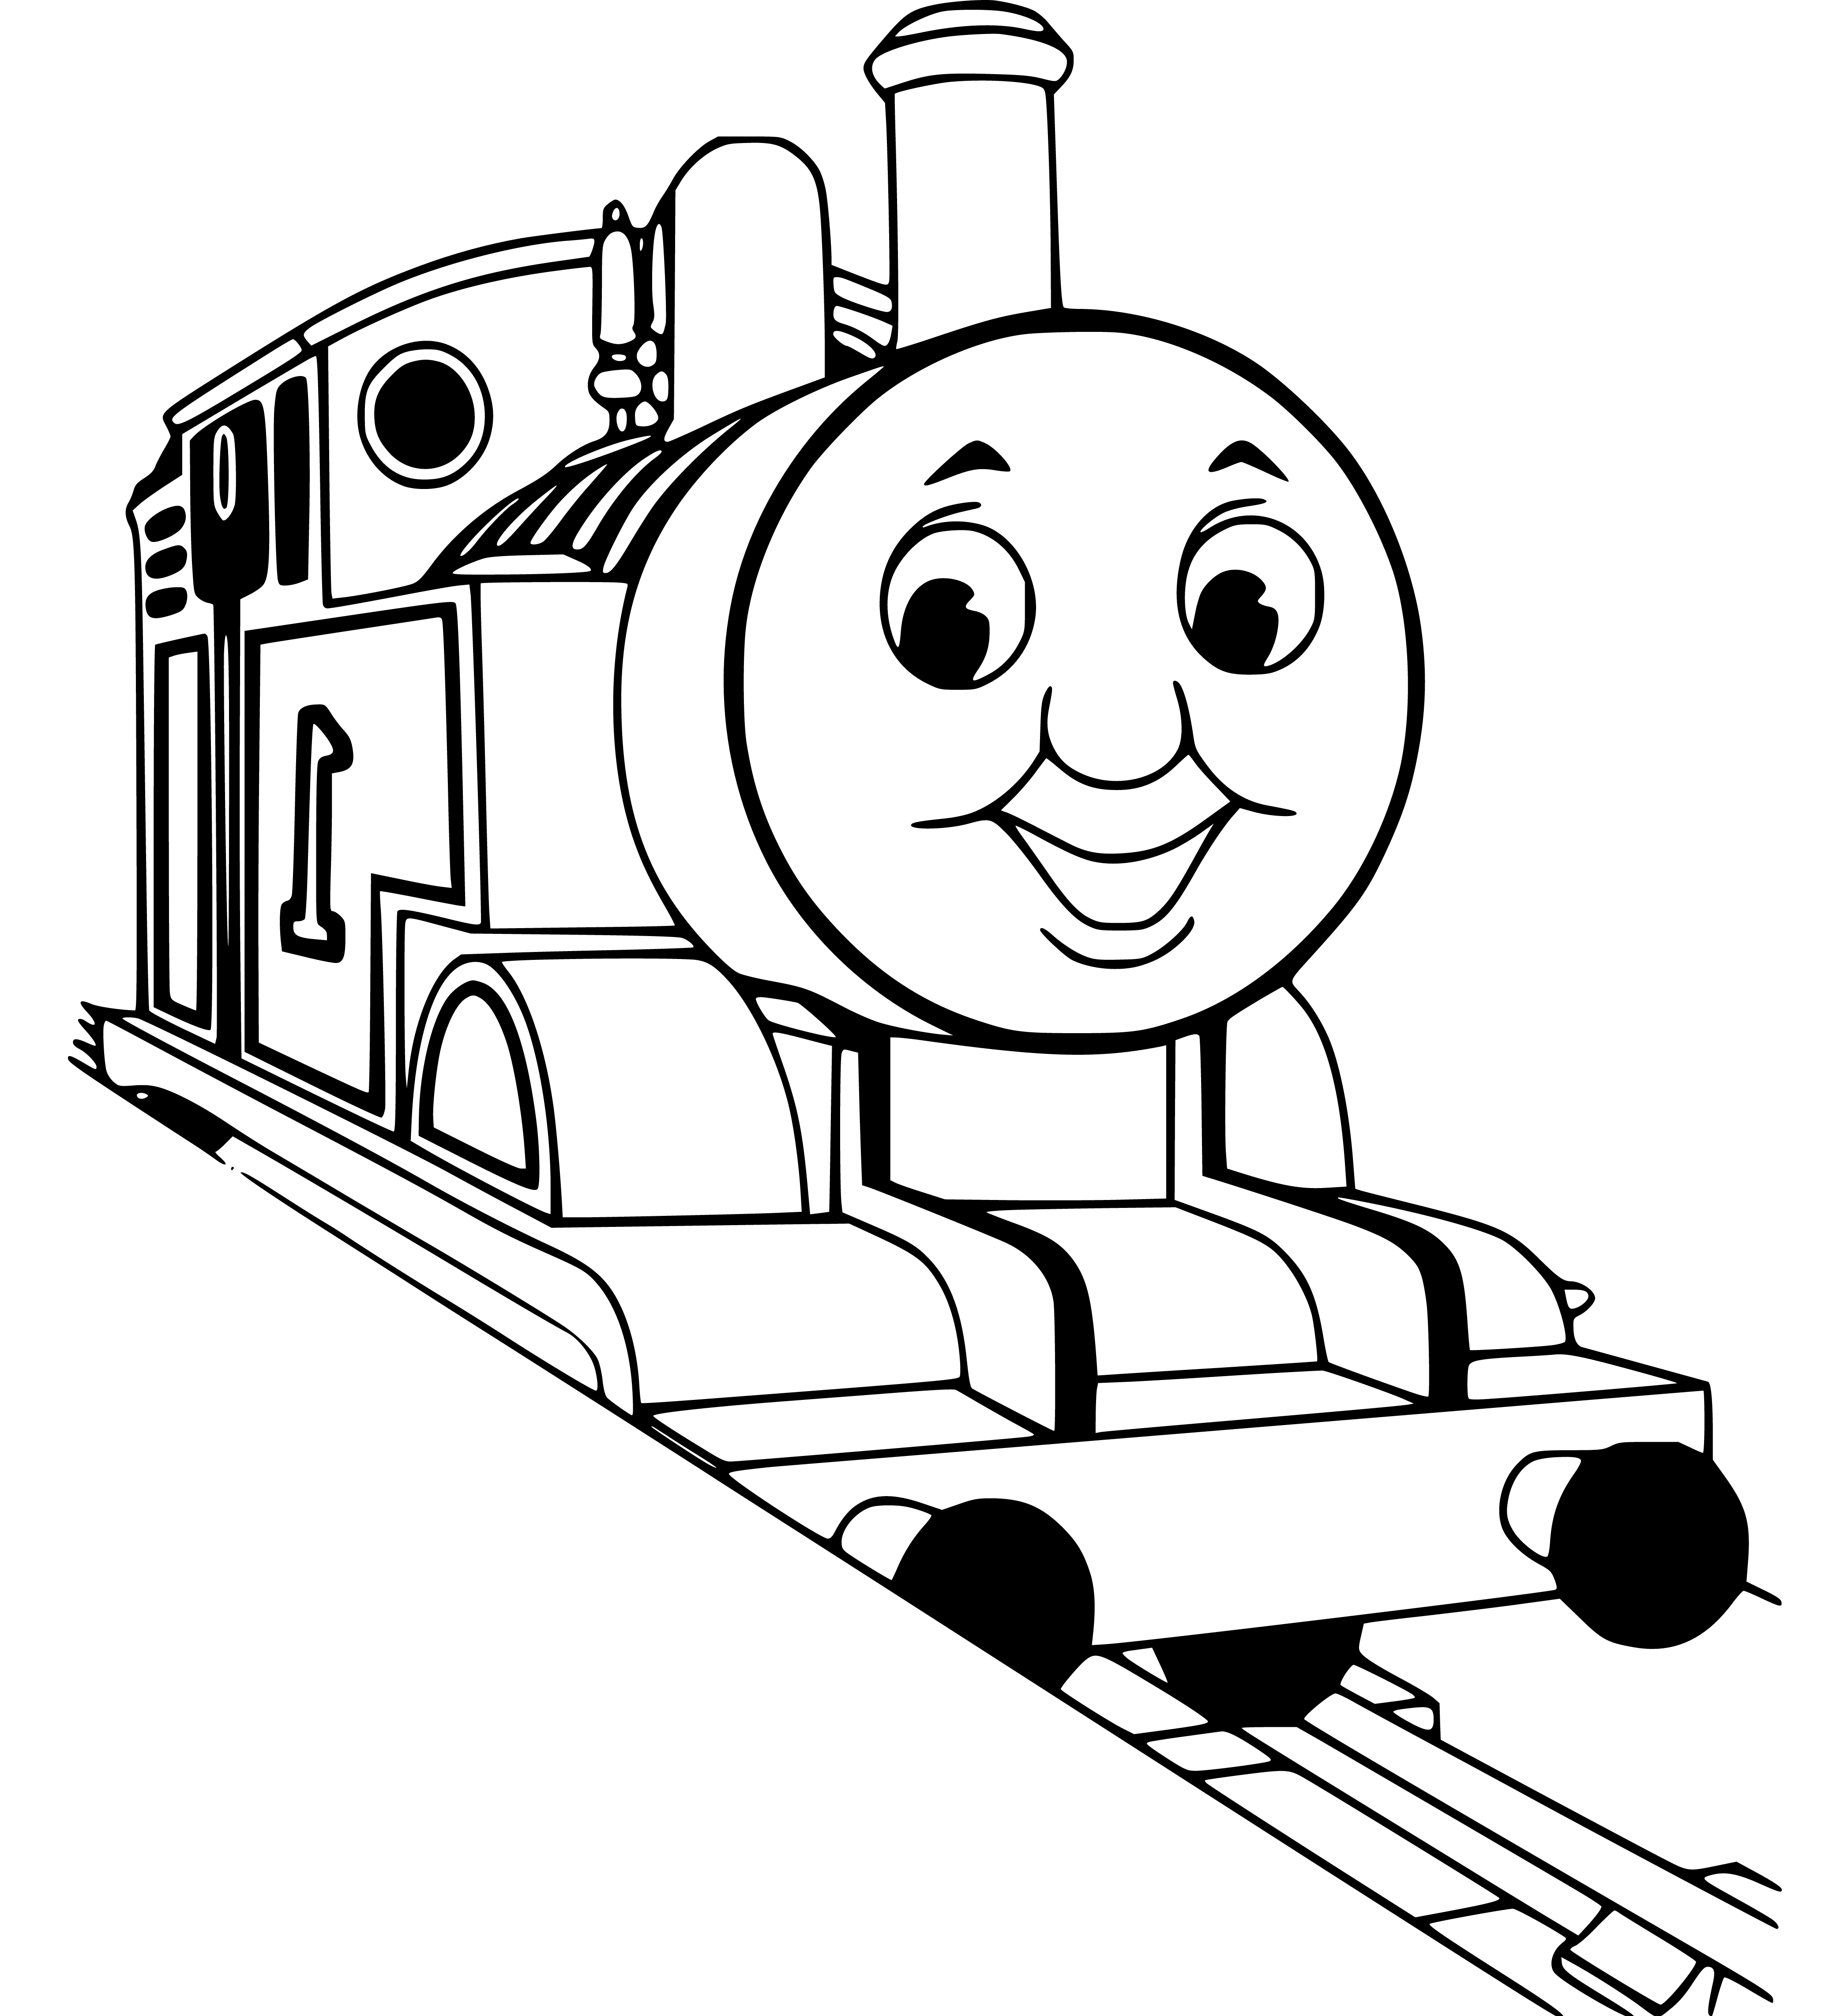 Thomas the Tank Engine Coloring Pages (thomas and friends) - SheetalColor.com